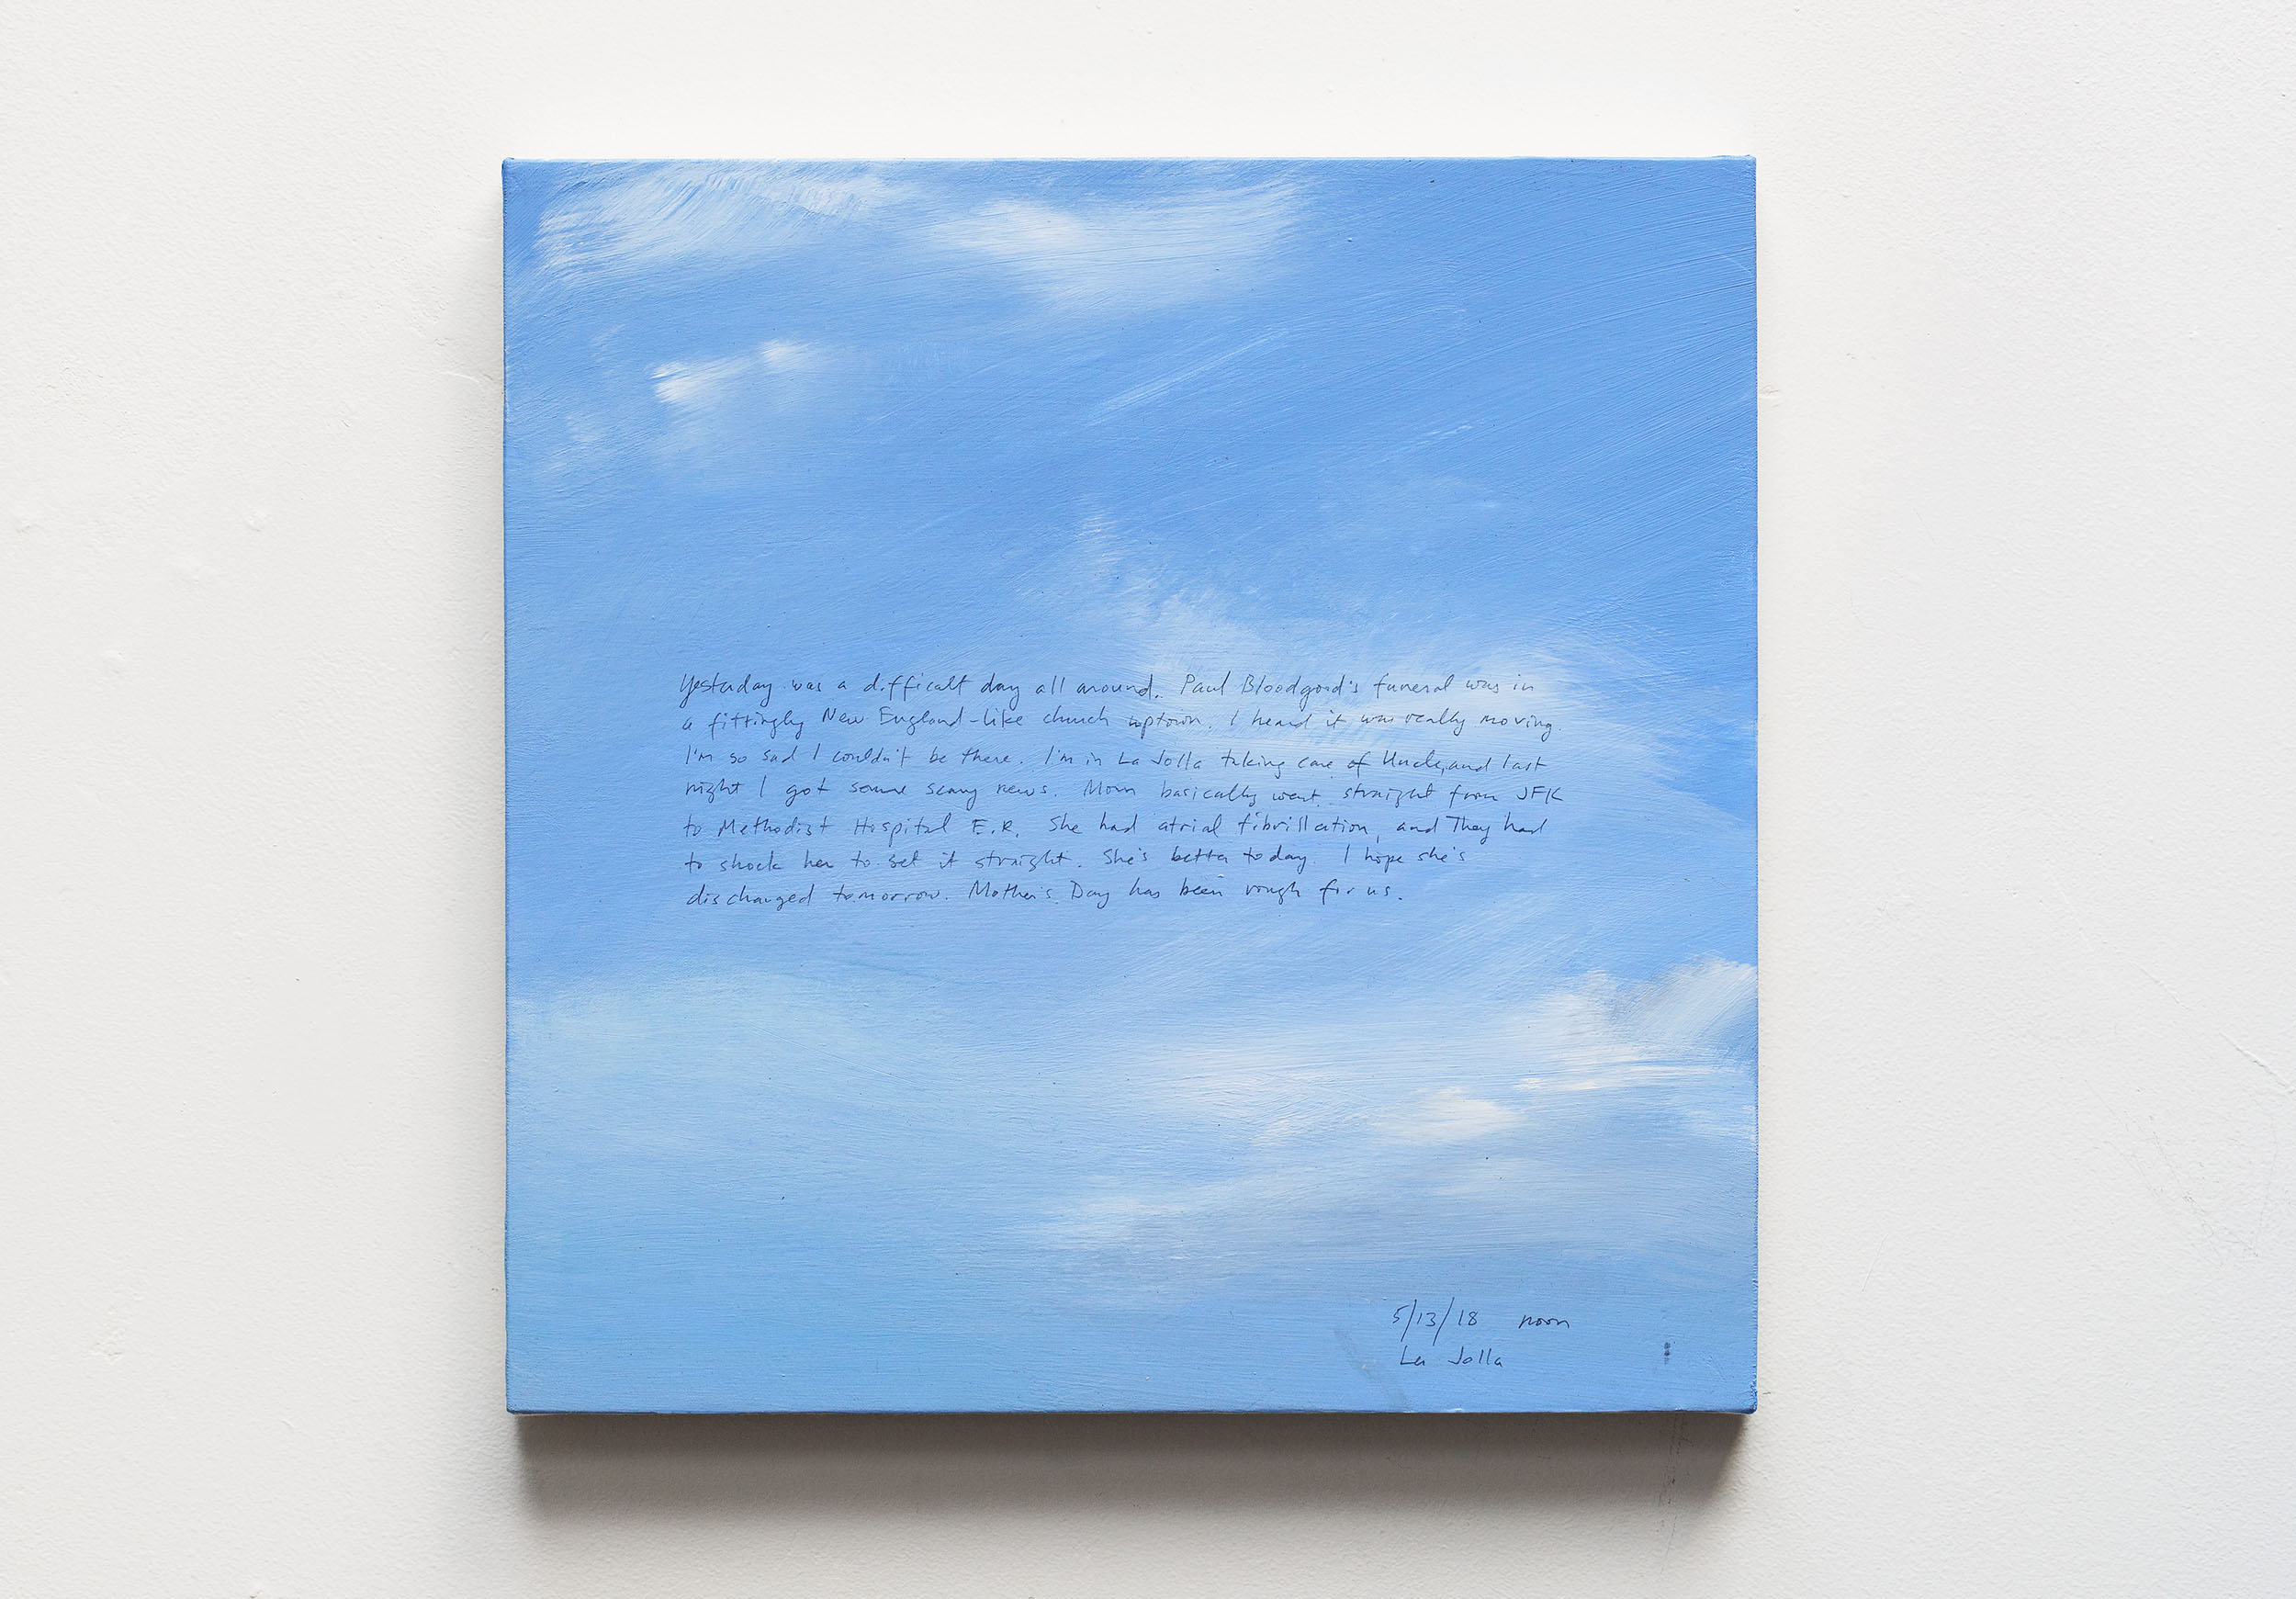 A 14 × 14 inch, acrylic painting of the sky. A journal entry is handwritten on the painting:

“Yesterday was a difficult day all around. Paul Bloodgood’s funeral was in a fittingly New England-like church uptown. I heard it was really moving. I’m so sad I couldn’t be there. I’m in La Jolla taking care of Uncle and last night I got some scary news. Mom basically went straight from JFK to Methodist Hospital E.R. She had atrial fibrillation and they had to shock her to set it straight. She’s better today. I hope she’s discharged tomorrow. Mother’s Day has been rough for us.

5/13/18 noon
La Jolla”